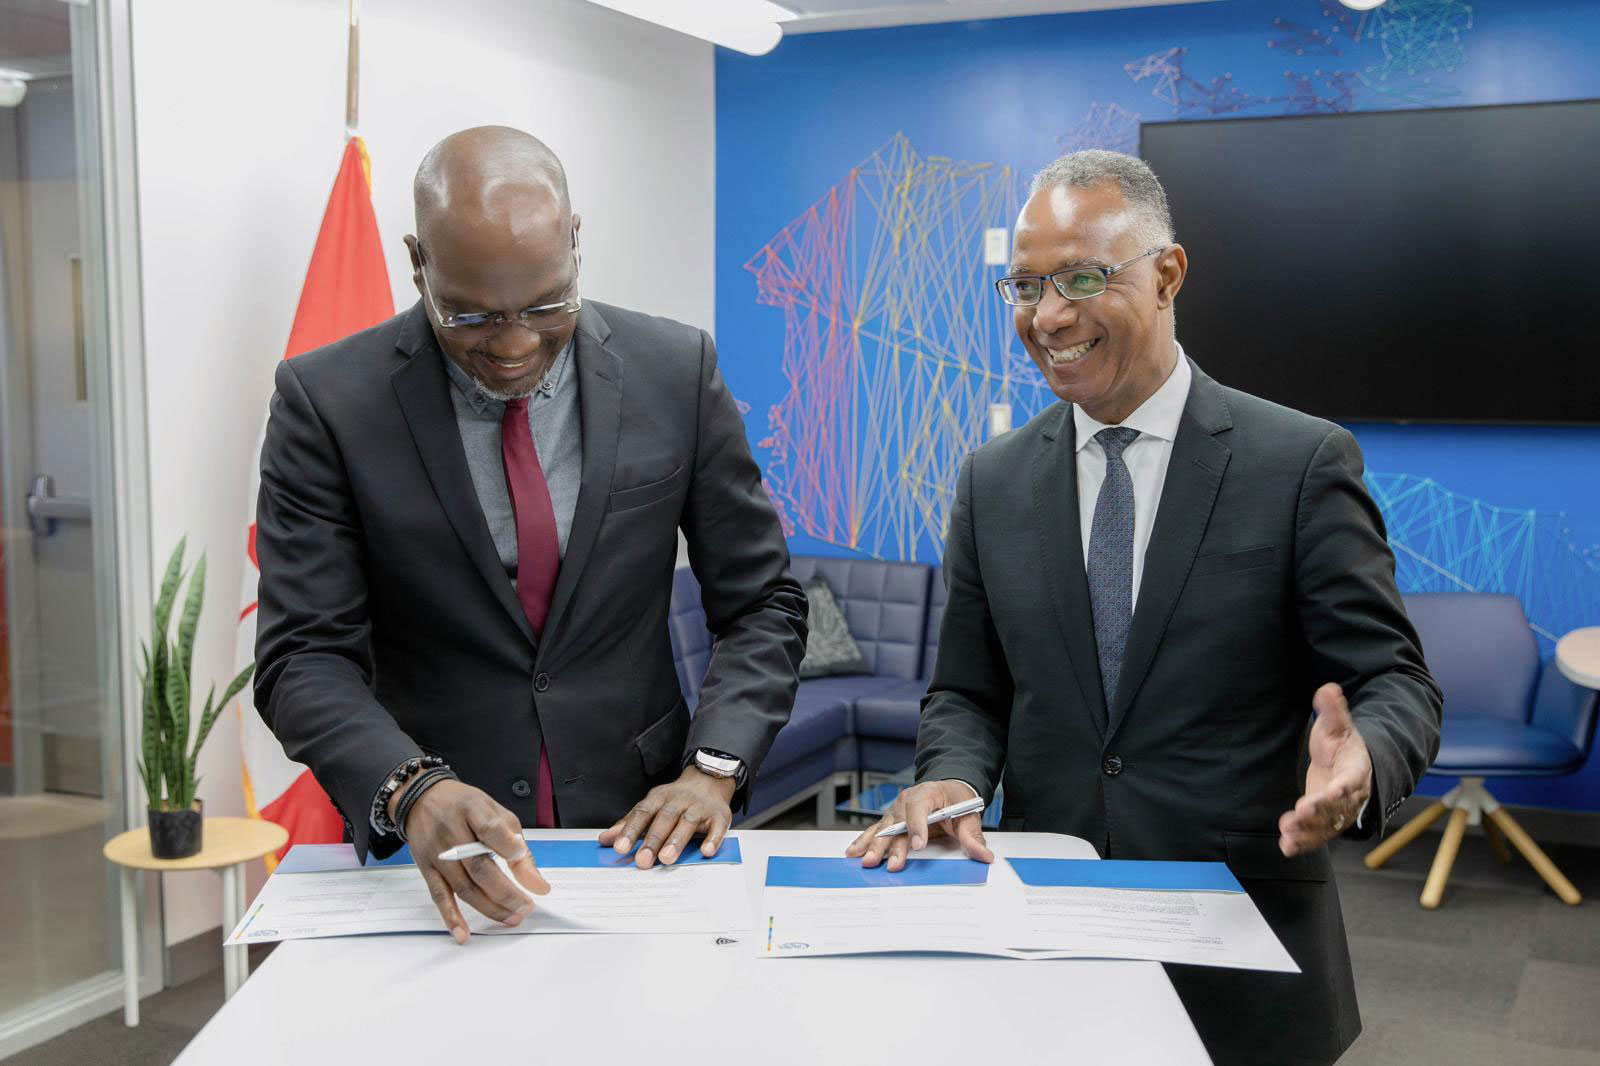 Honourable Daryll Matthew and President Fearon signing the MOU